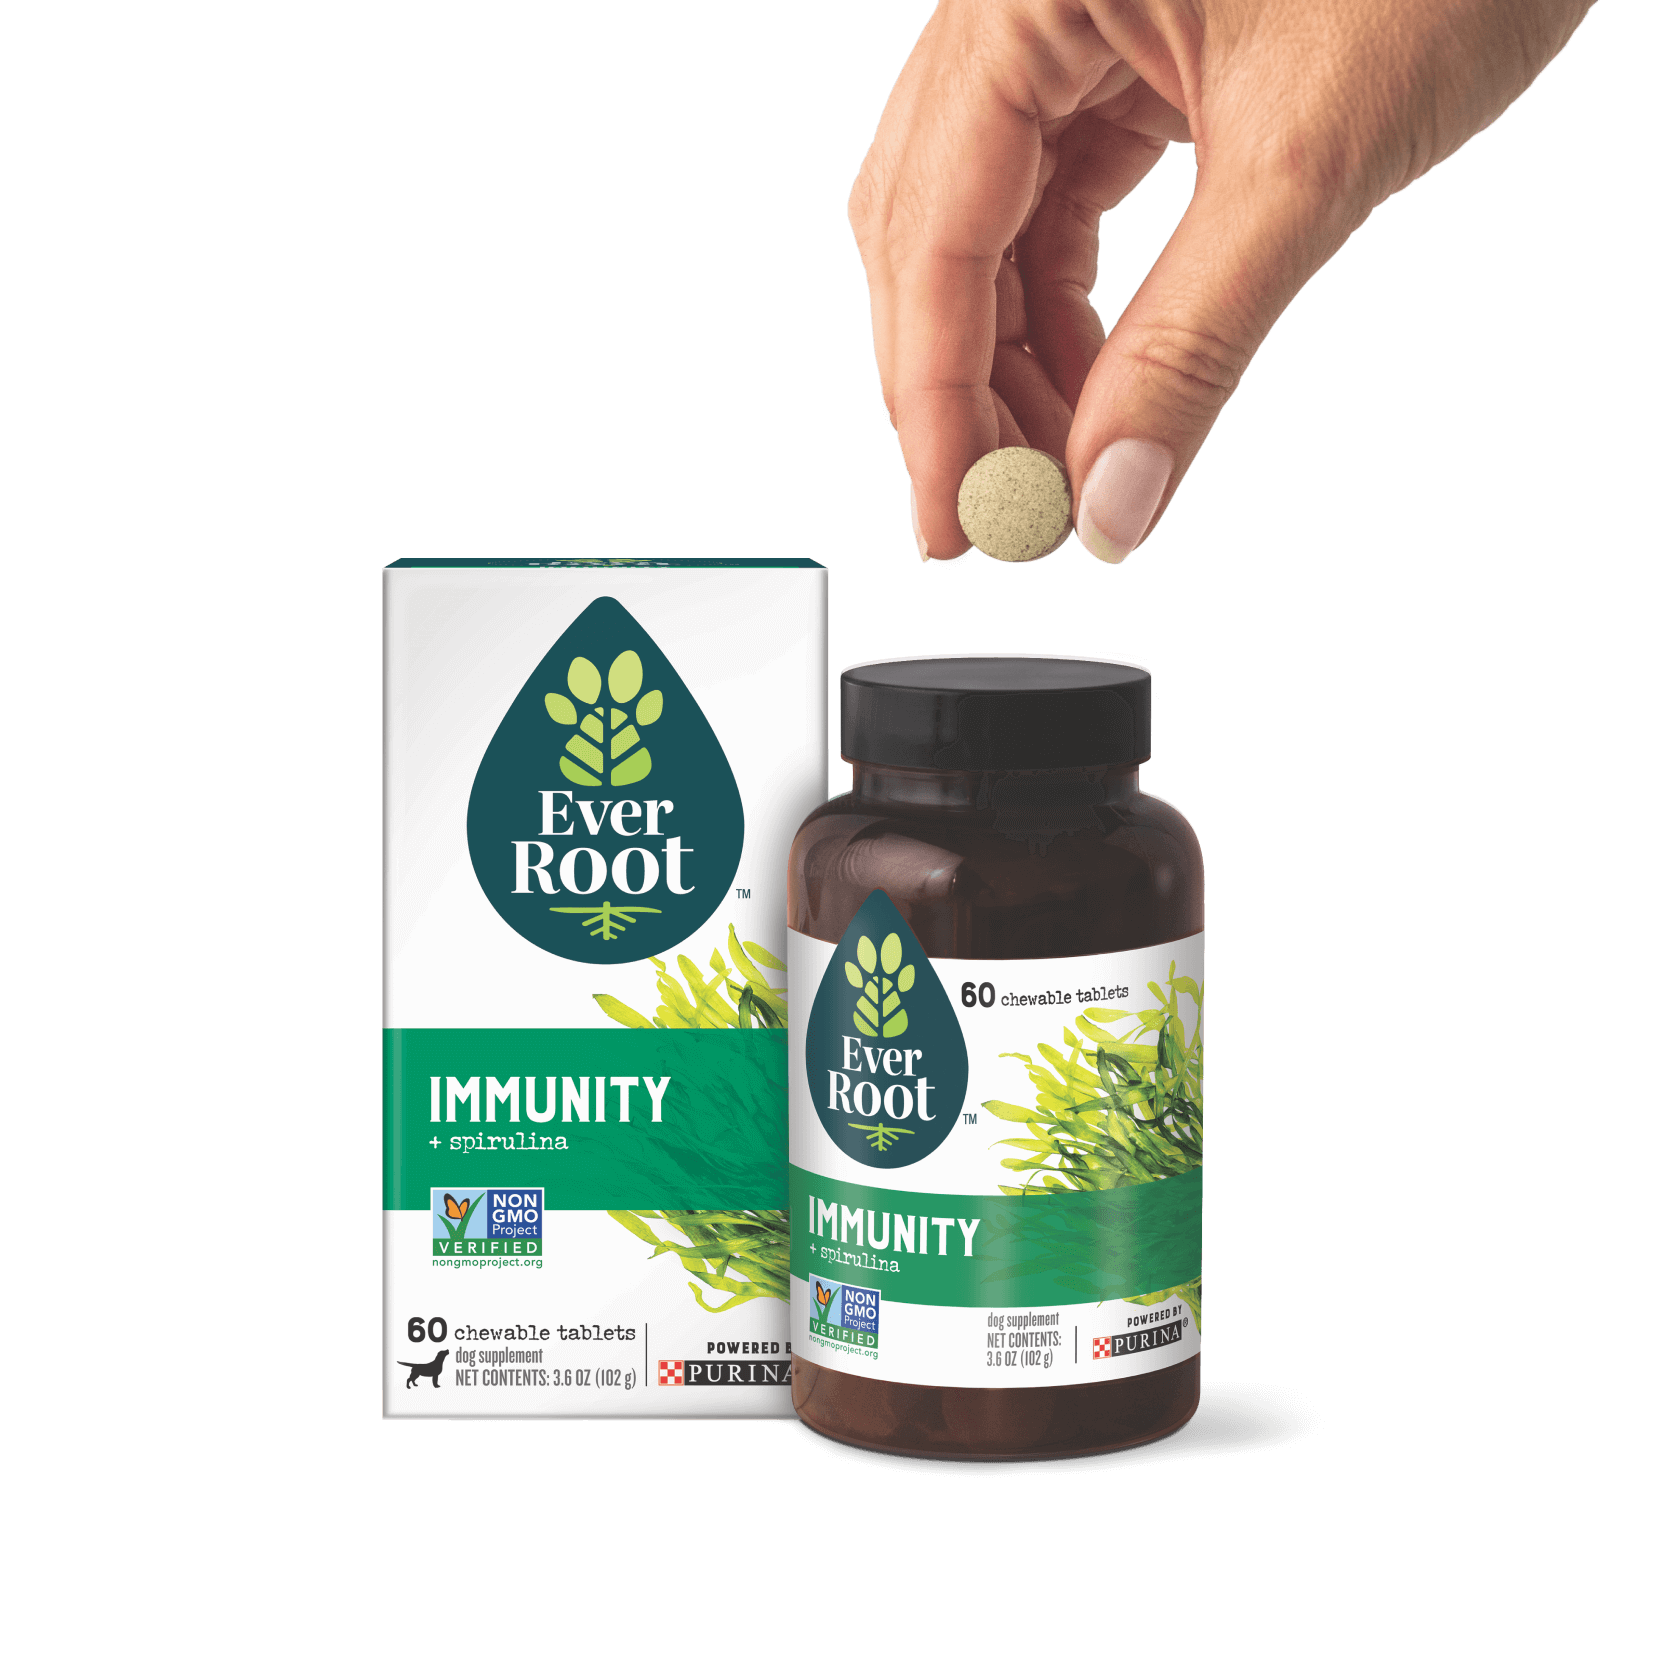 EverRoot Immunity Chewable Tablets with packaging and hand holding tablet